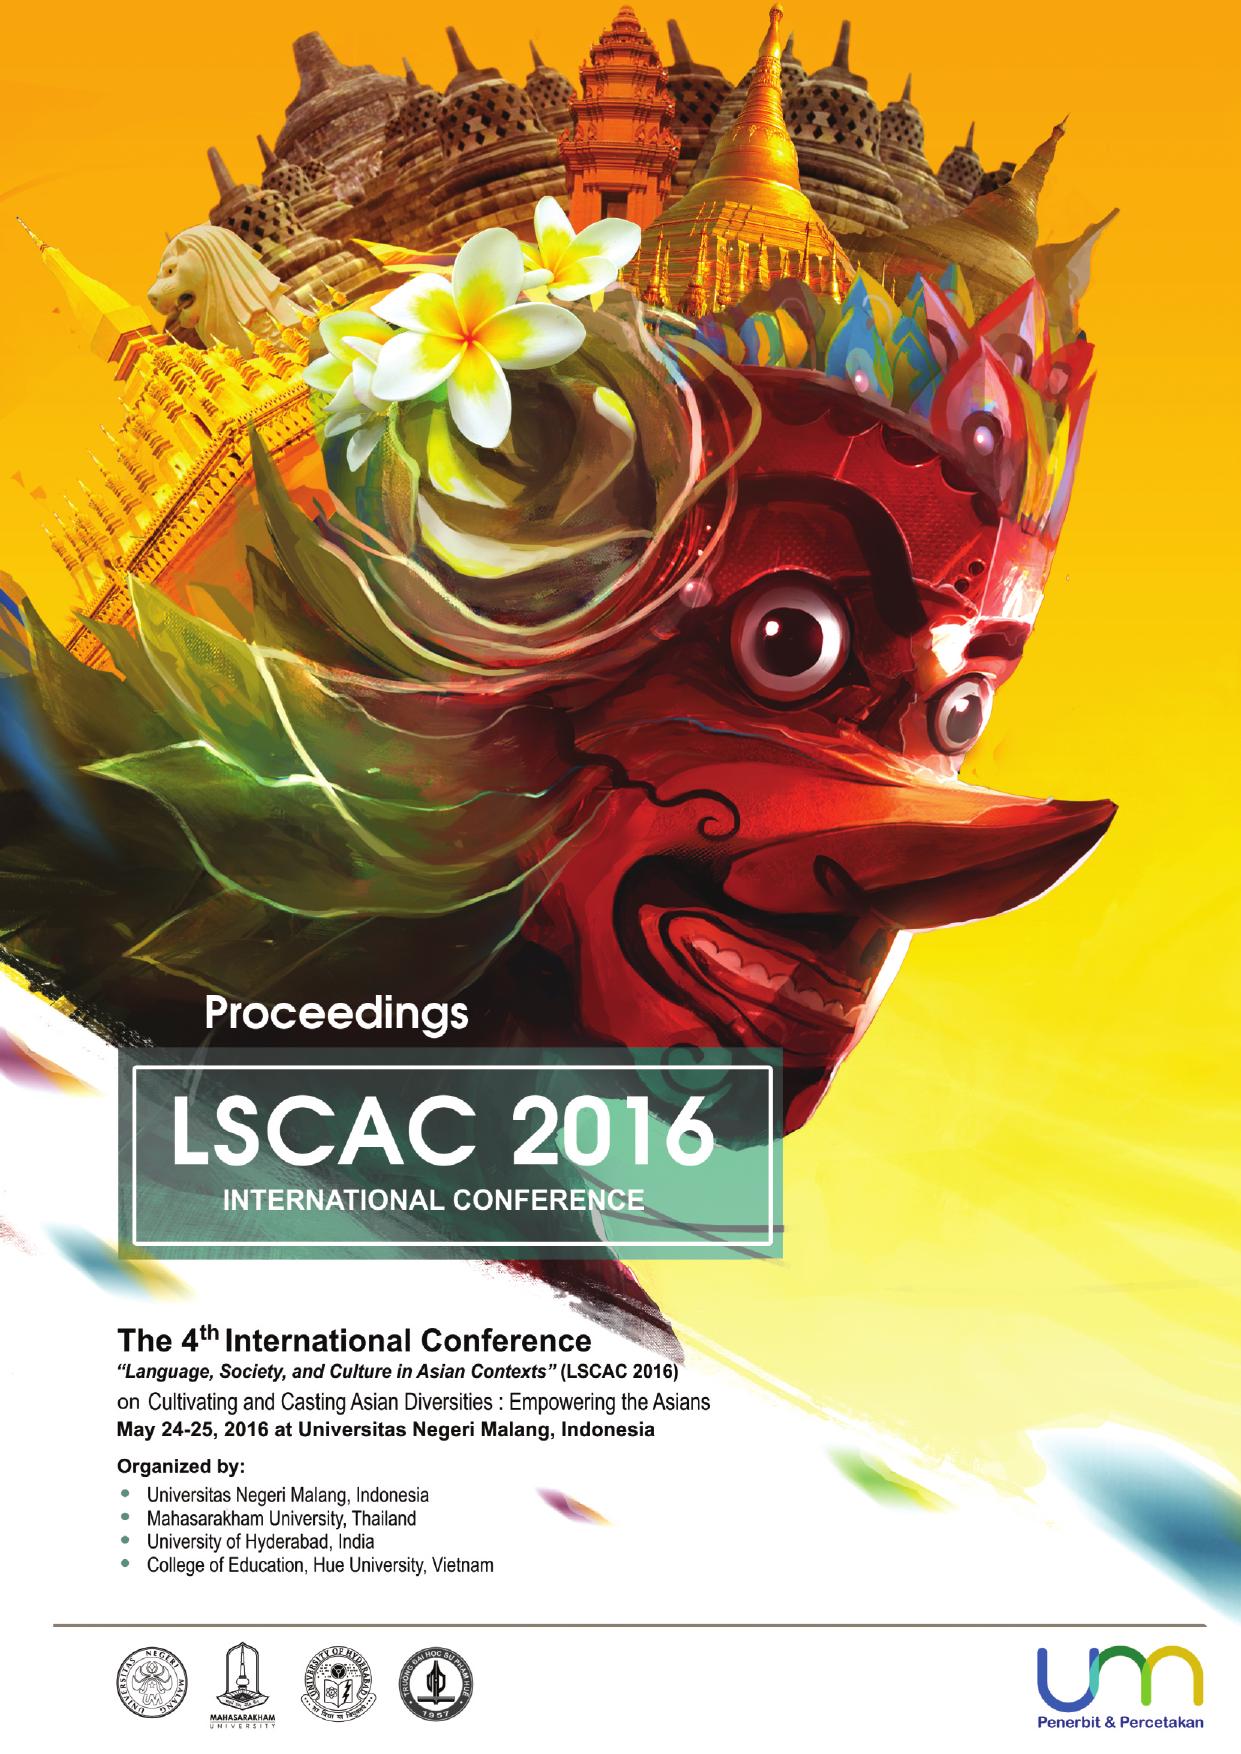 LANGUAGE, SOCIETY, AND CULTURE IN ASIAN CONTEXTS (LSCAC 2016.pdf